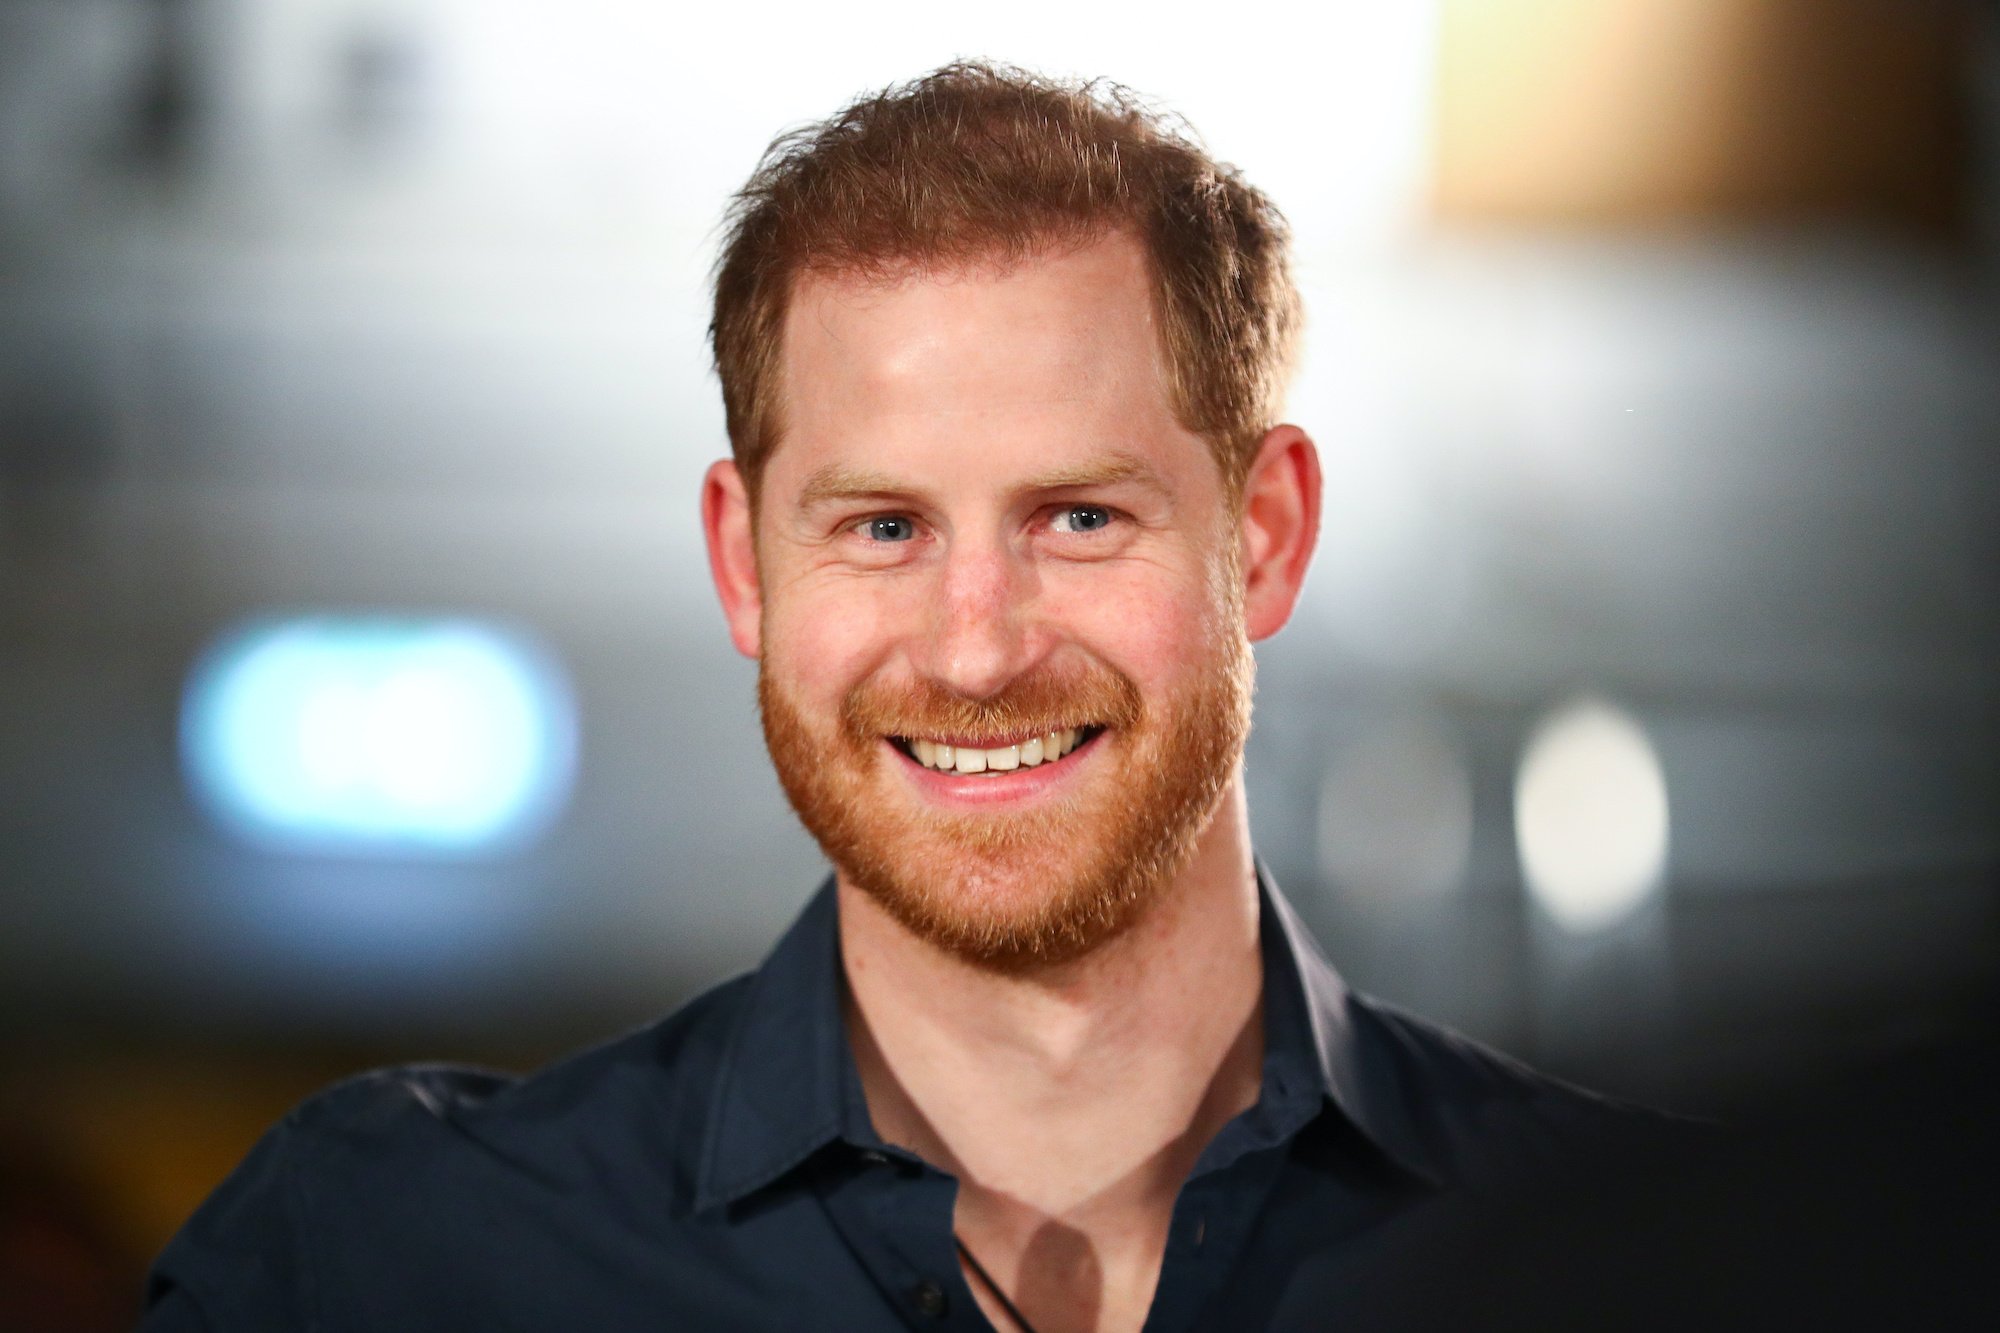 Prince Harry Wants 1 Golden Globe Winner to Play Him In a Movie